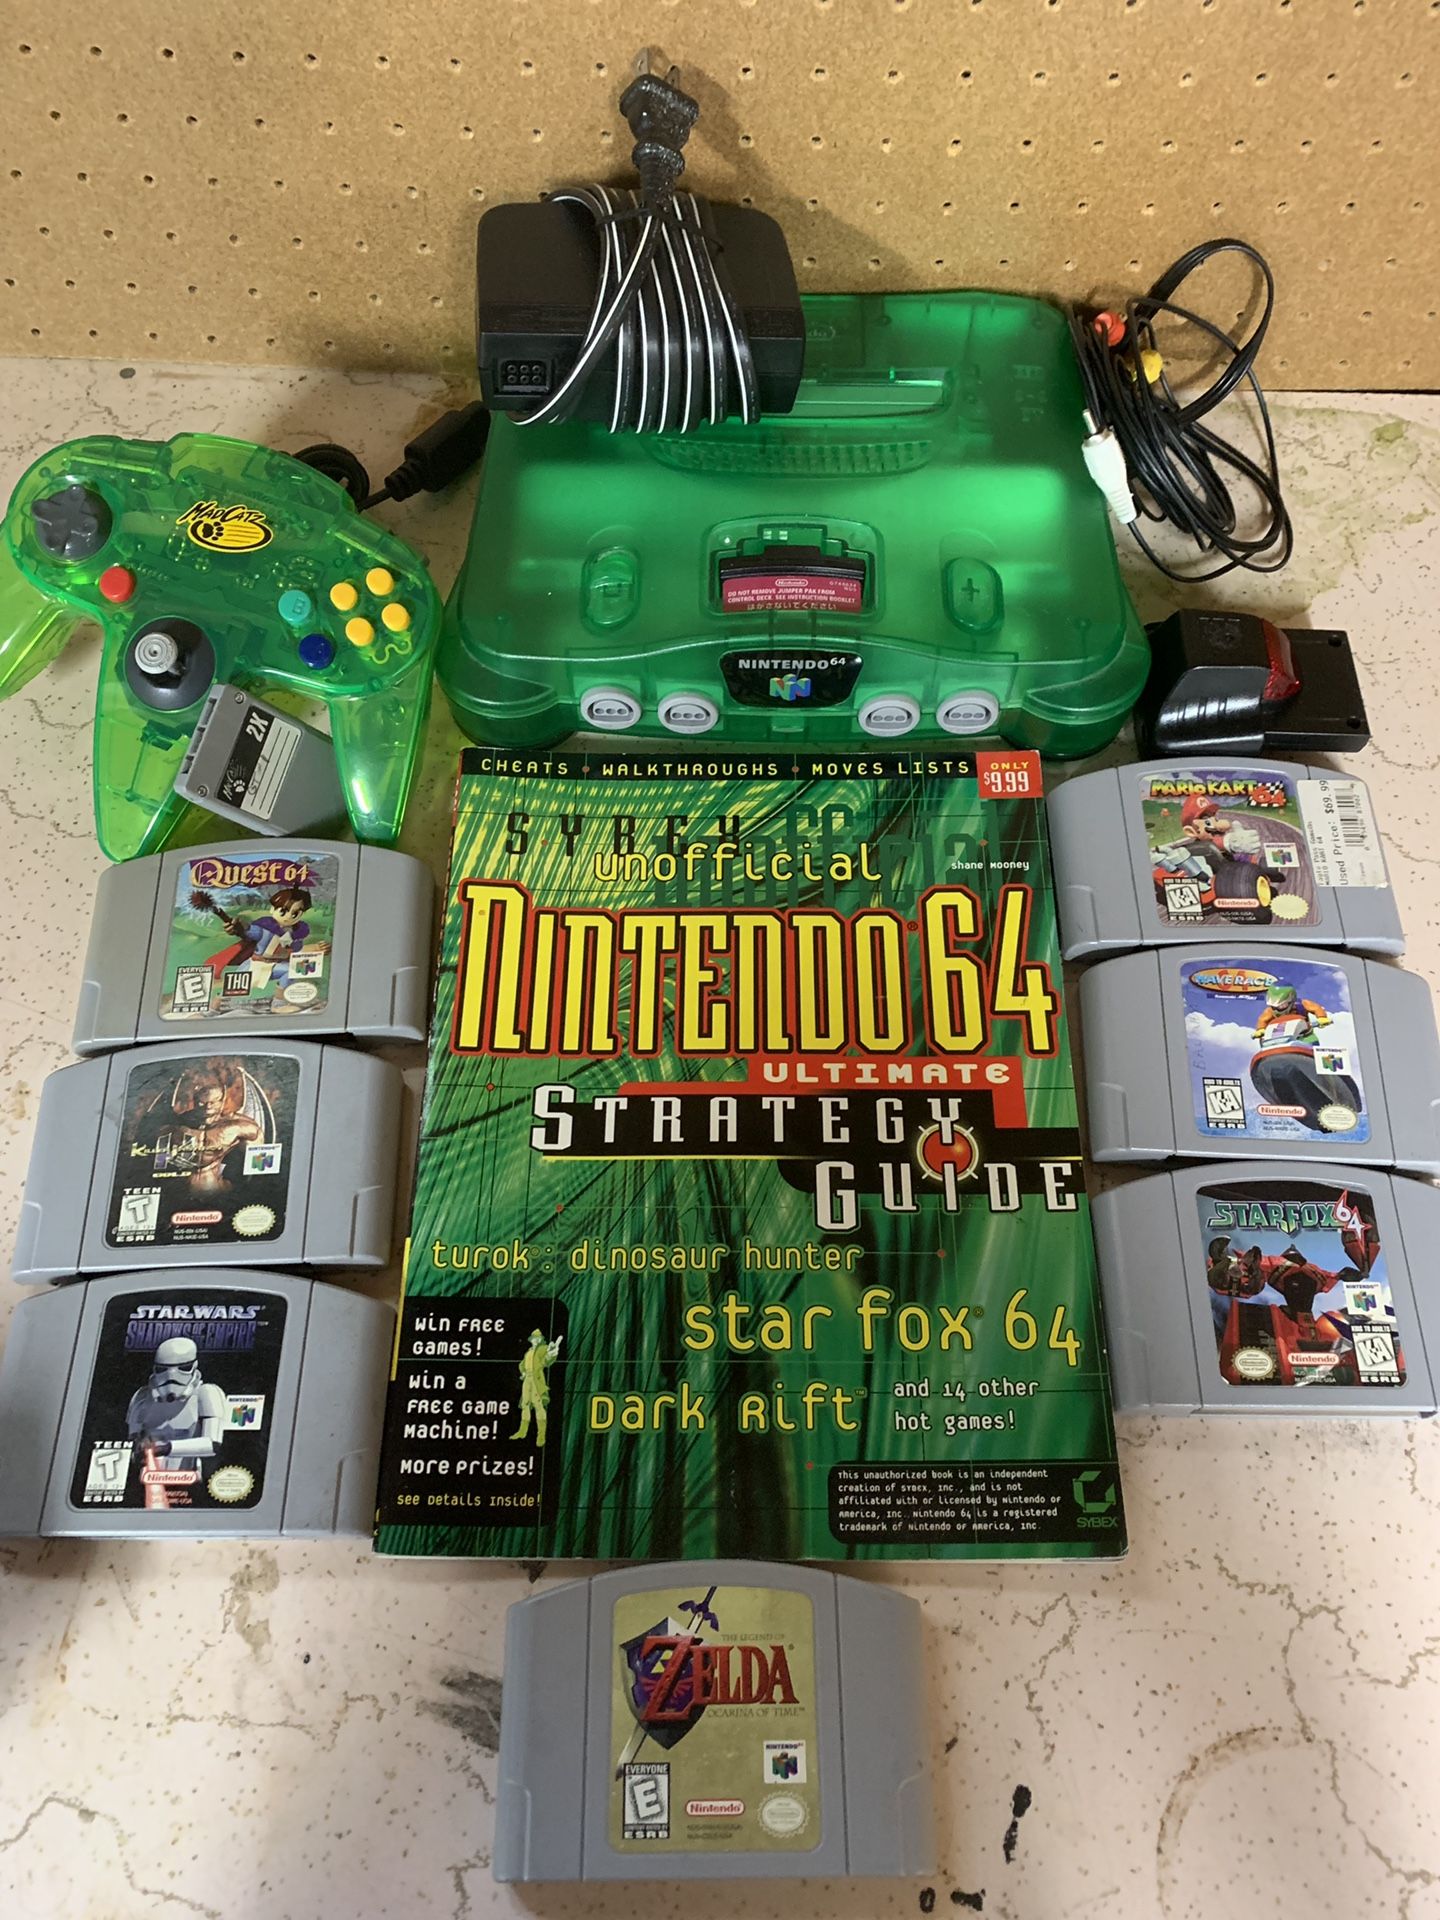 Nintendo 64 (jungle green n64 ) with 7 games , 1 controller, memory card , and tremor pak, (Zelda ocarina of time , Star Fox , Star Wars , killer ins